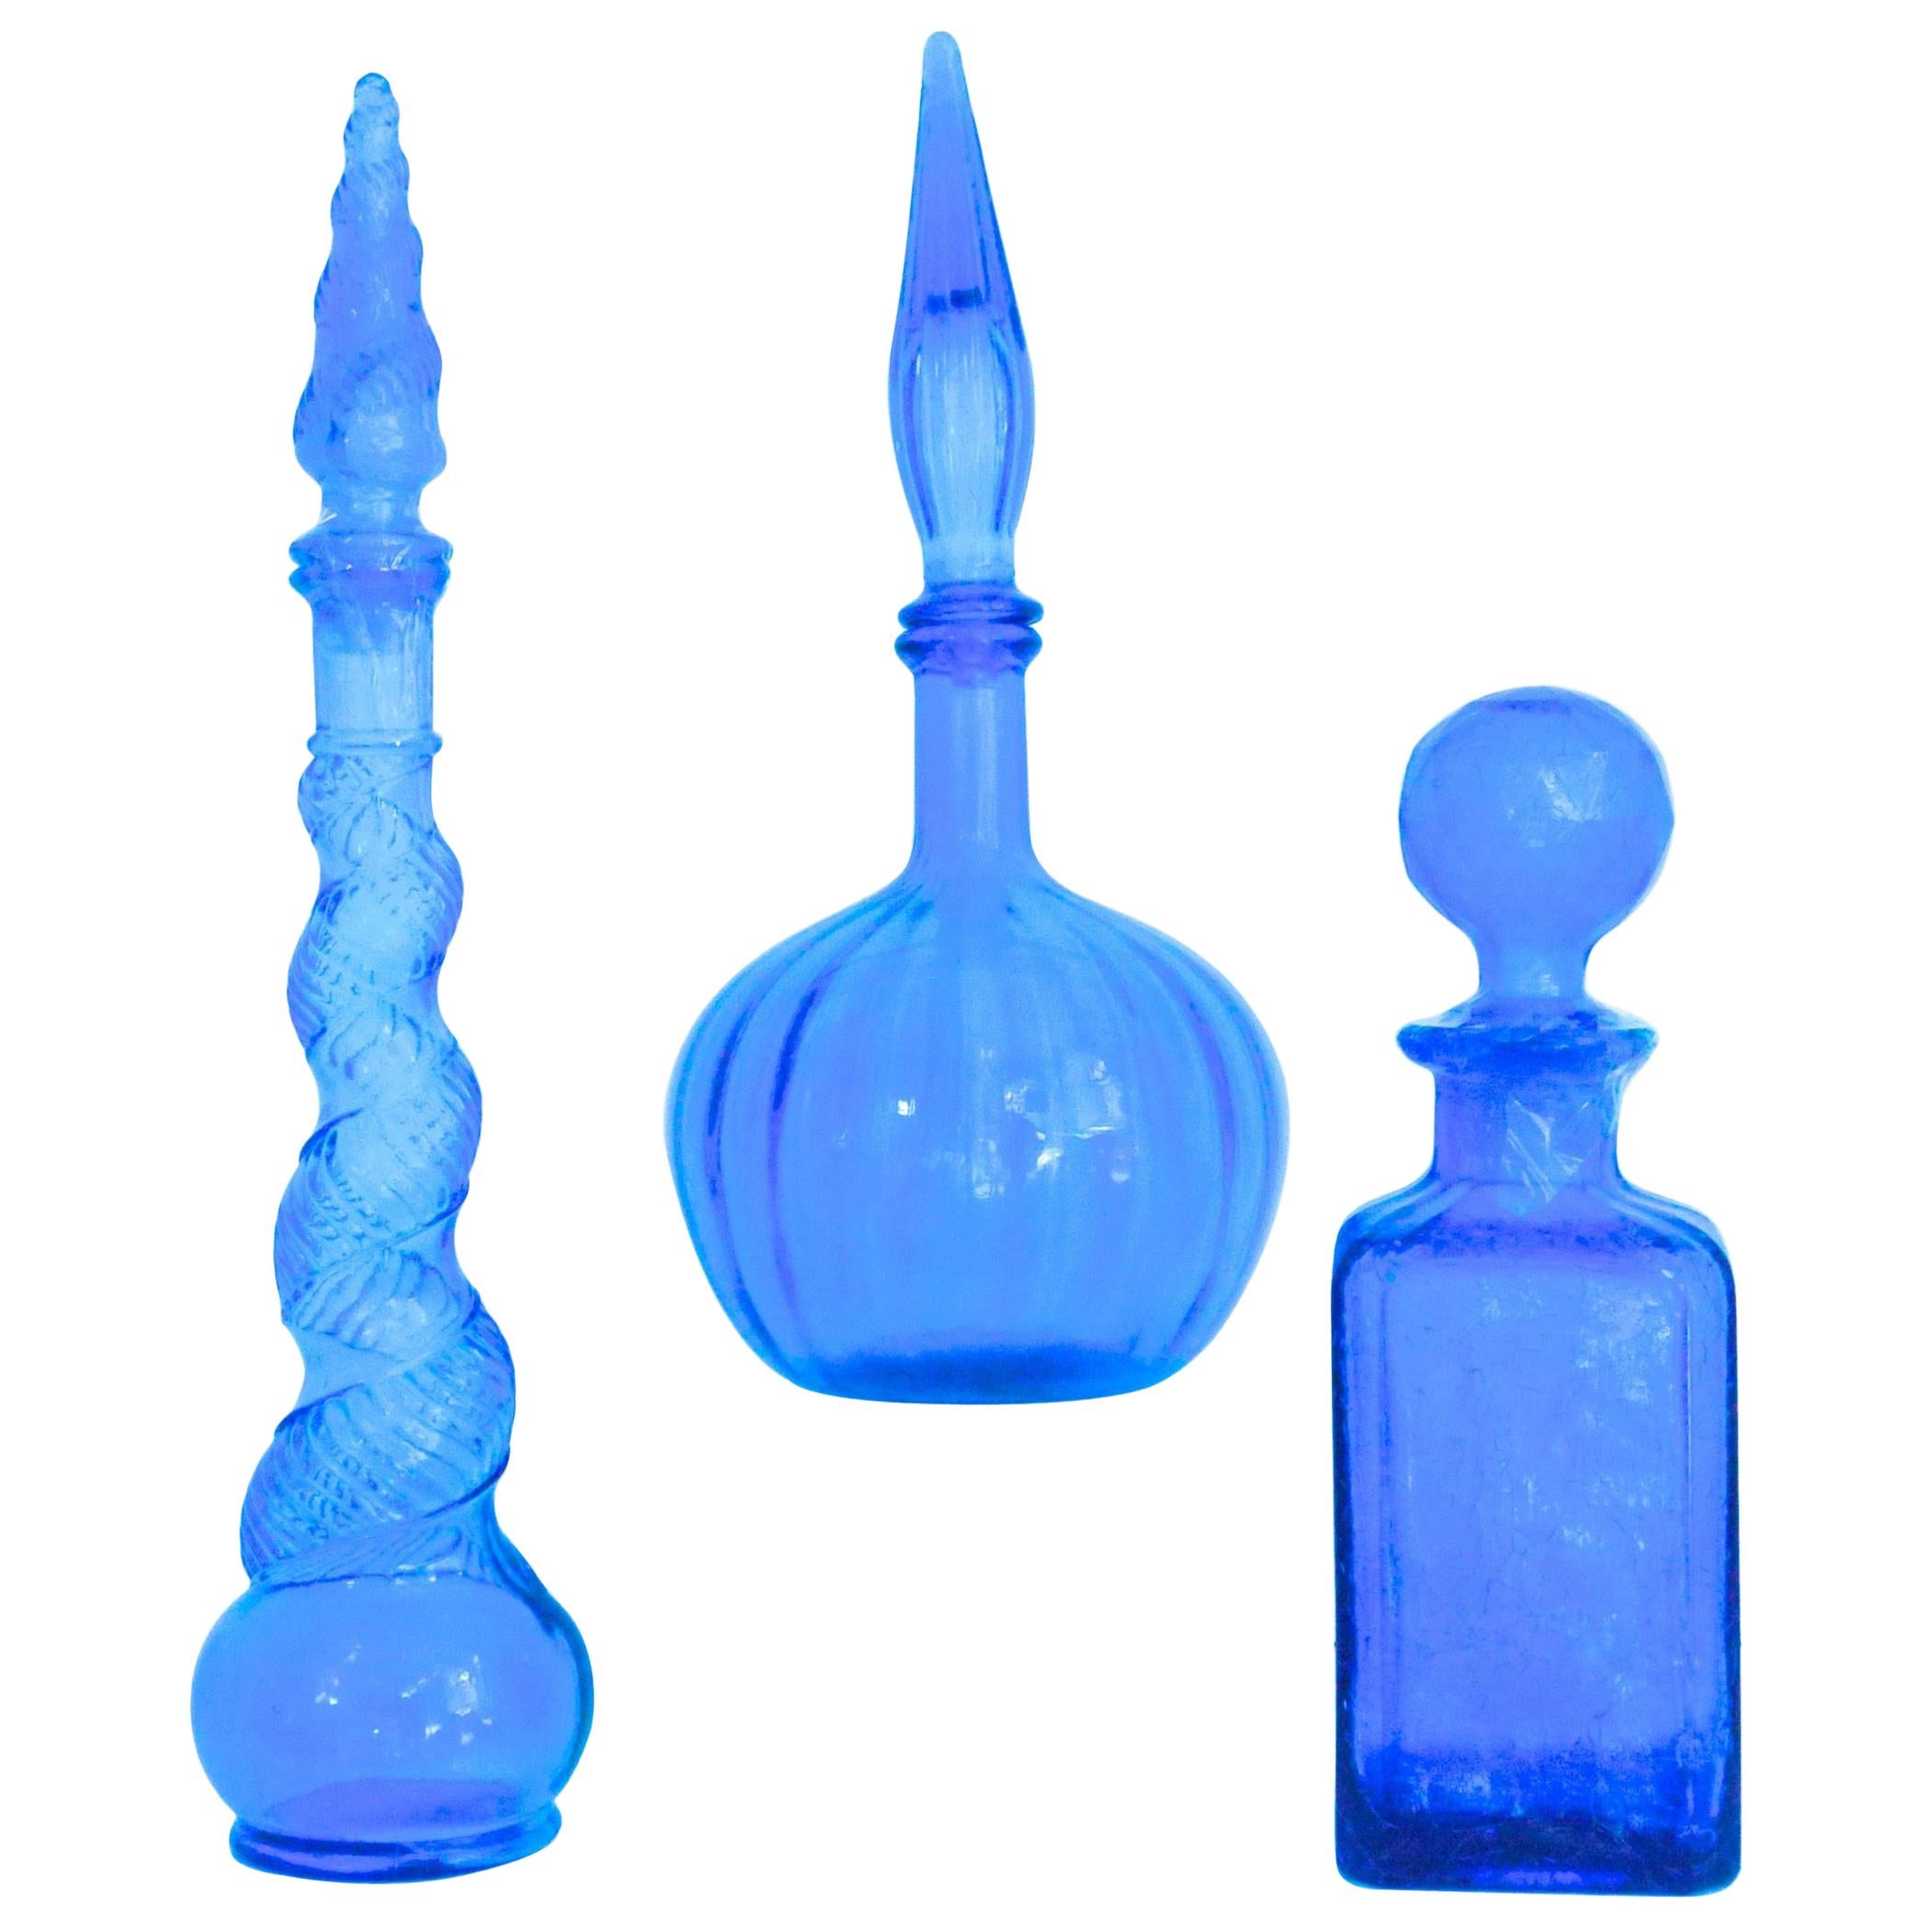 Blue Genie Bottles Collection 3 Pieces by Blenko and Empoli, Early 1960 For Sale